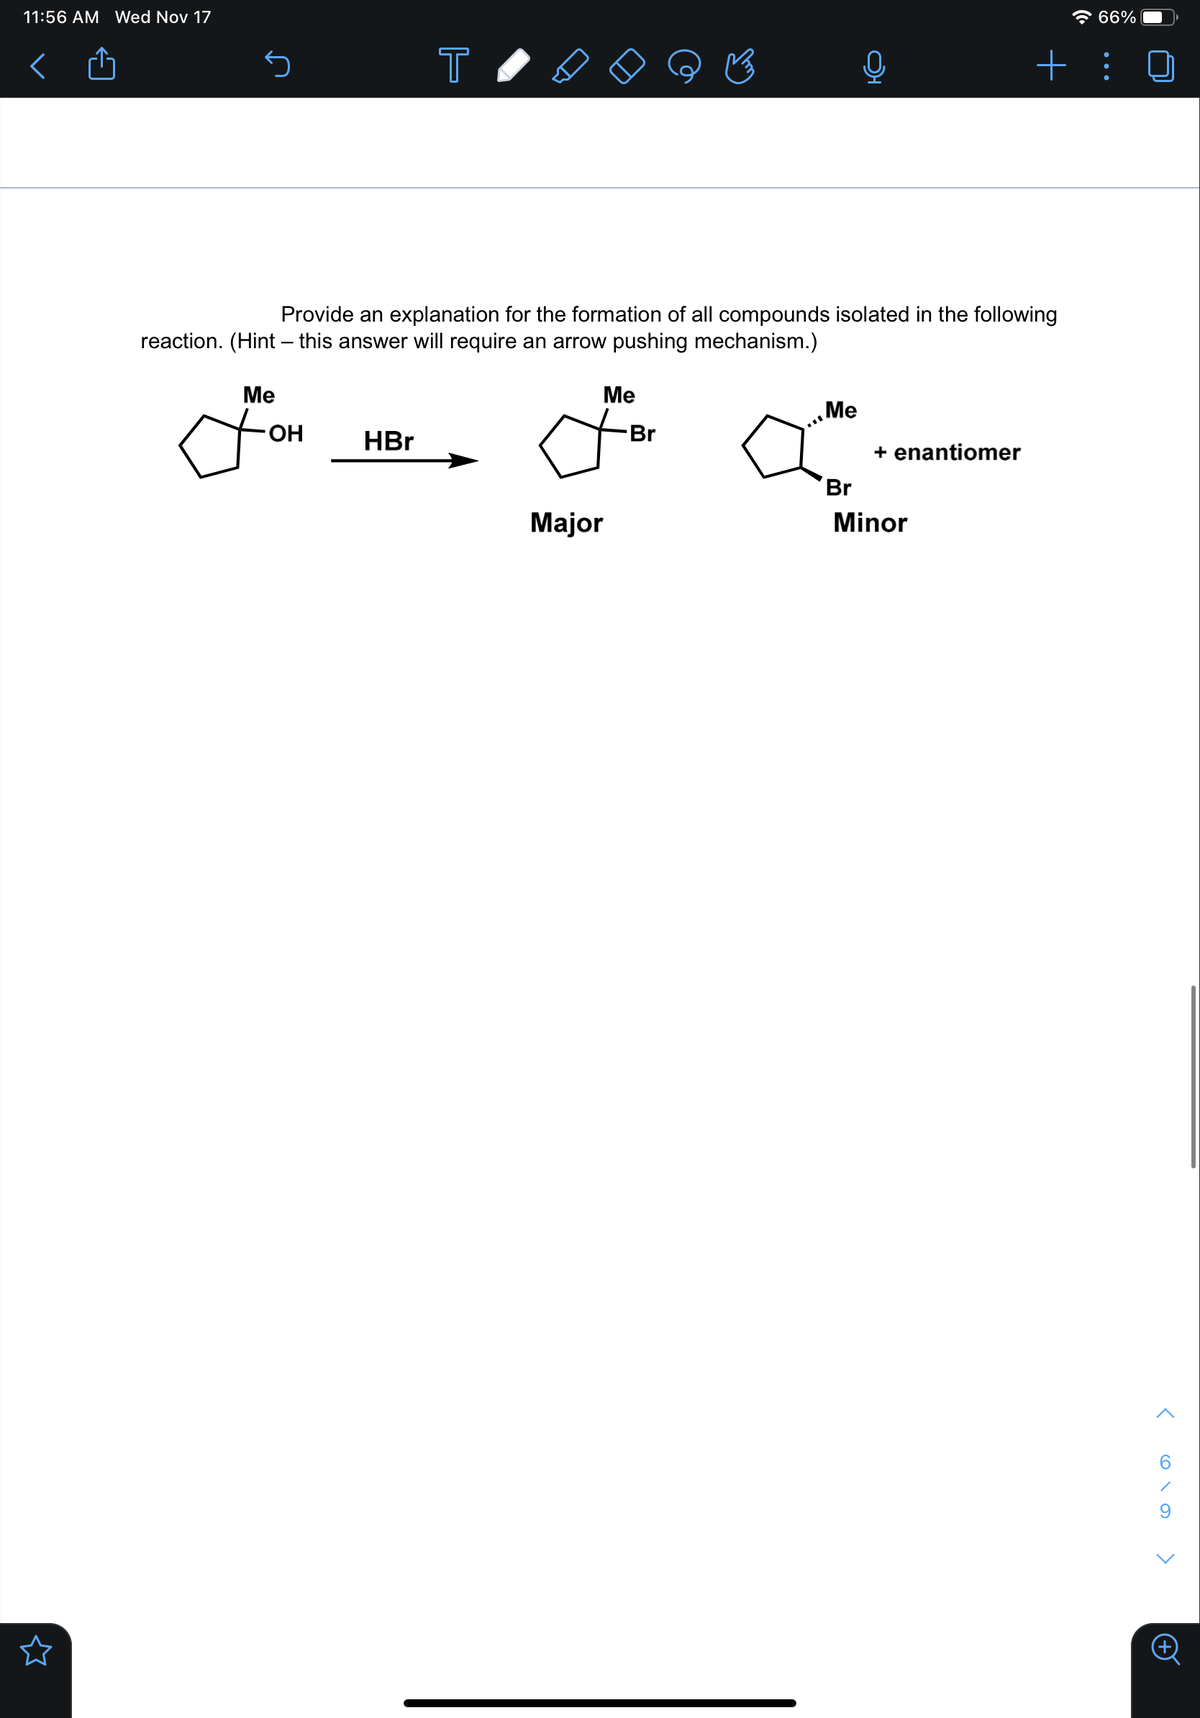 11:56 AM Wed Nov 17
* 66%
T
+ : 0
Provide an explanation for the formation of all compounds isolated in the following
reaction. (Hint – this answer will require an arrow pushing mechanism.)
Me
Me
Me
HO-
HBr
Br
+ enantiomer
Br
Major
Minor
